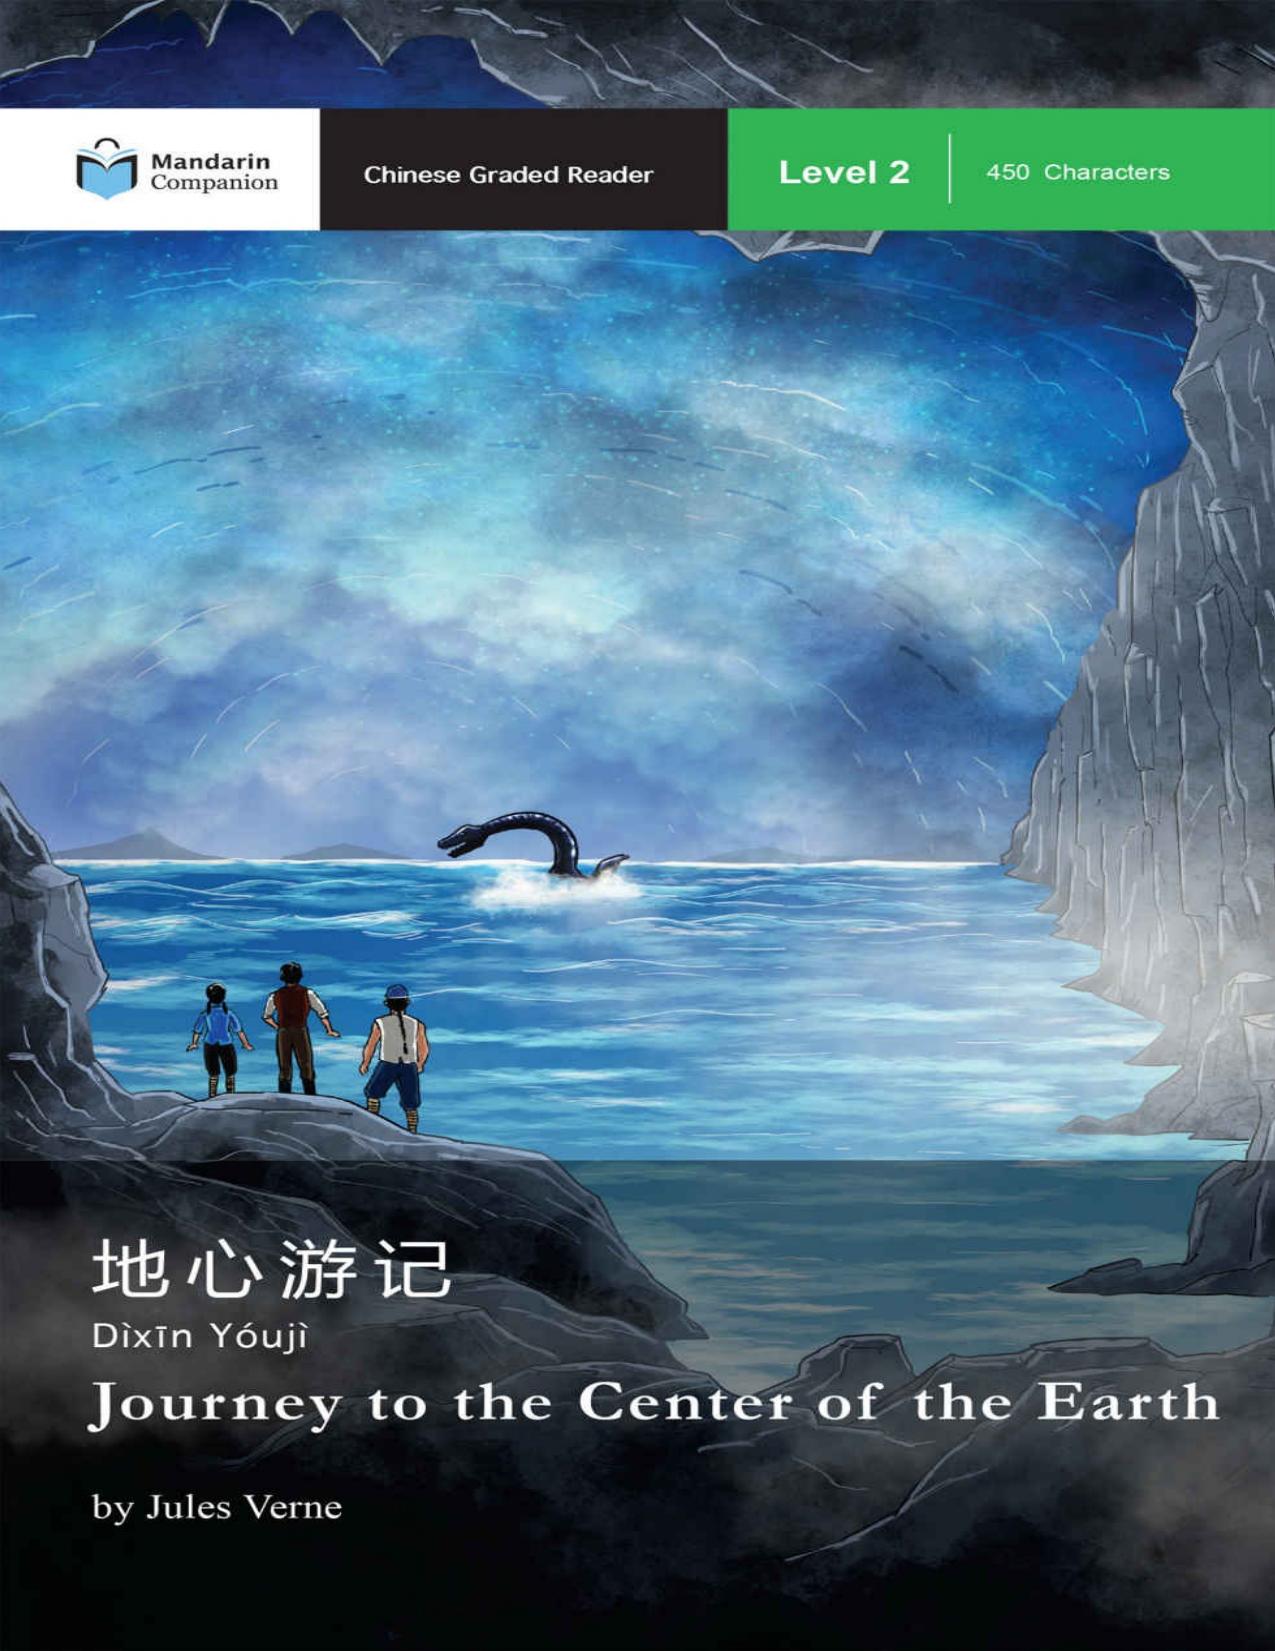 Journey to the Center of the Earth: Mandarin Companion Graded Readers Level 2 by Jules Verne